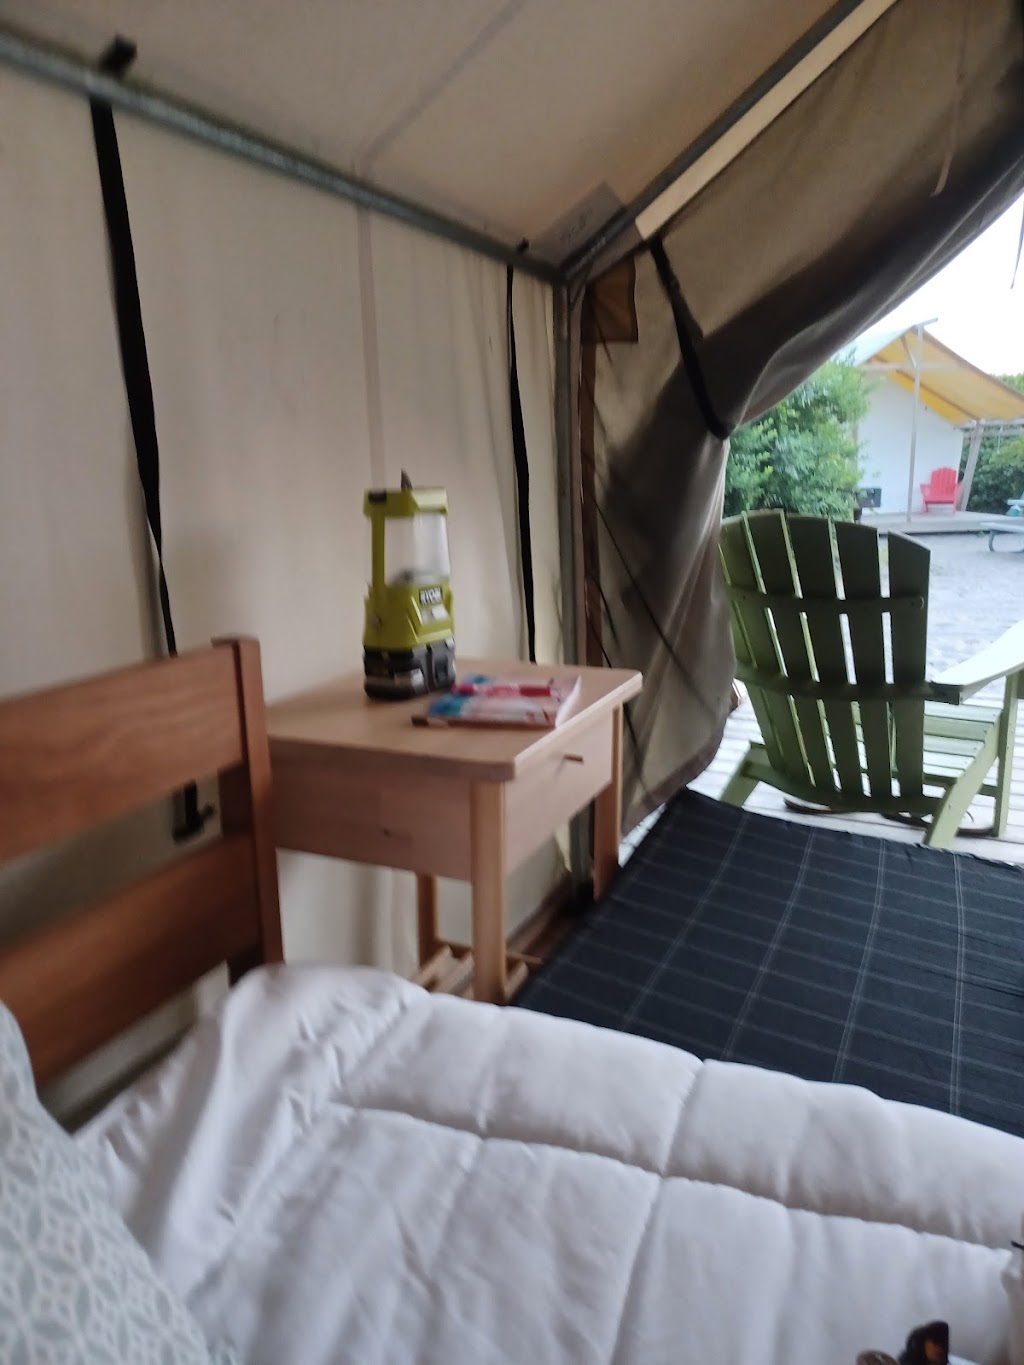 Watch Hill Fire Island Campground & Safari Tent Glamping | Fire Island National Seashore, Burma Rd, Patchogue, NY 11772 | Phone: (917) 257-3652